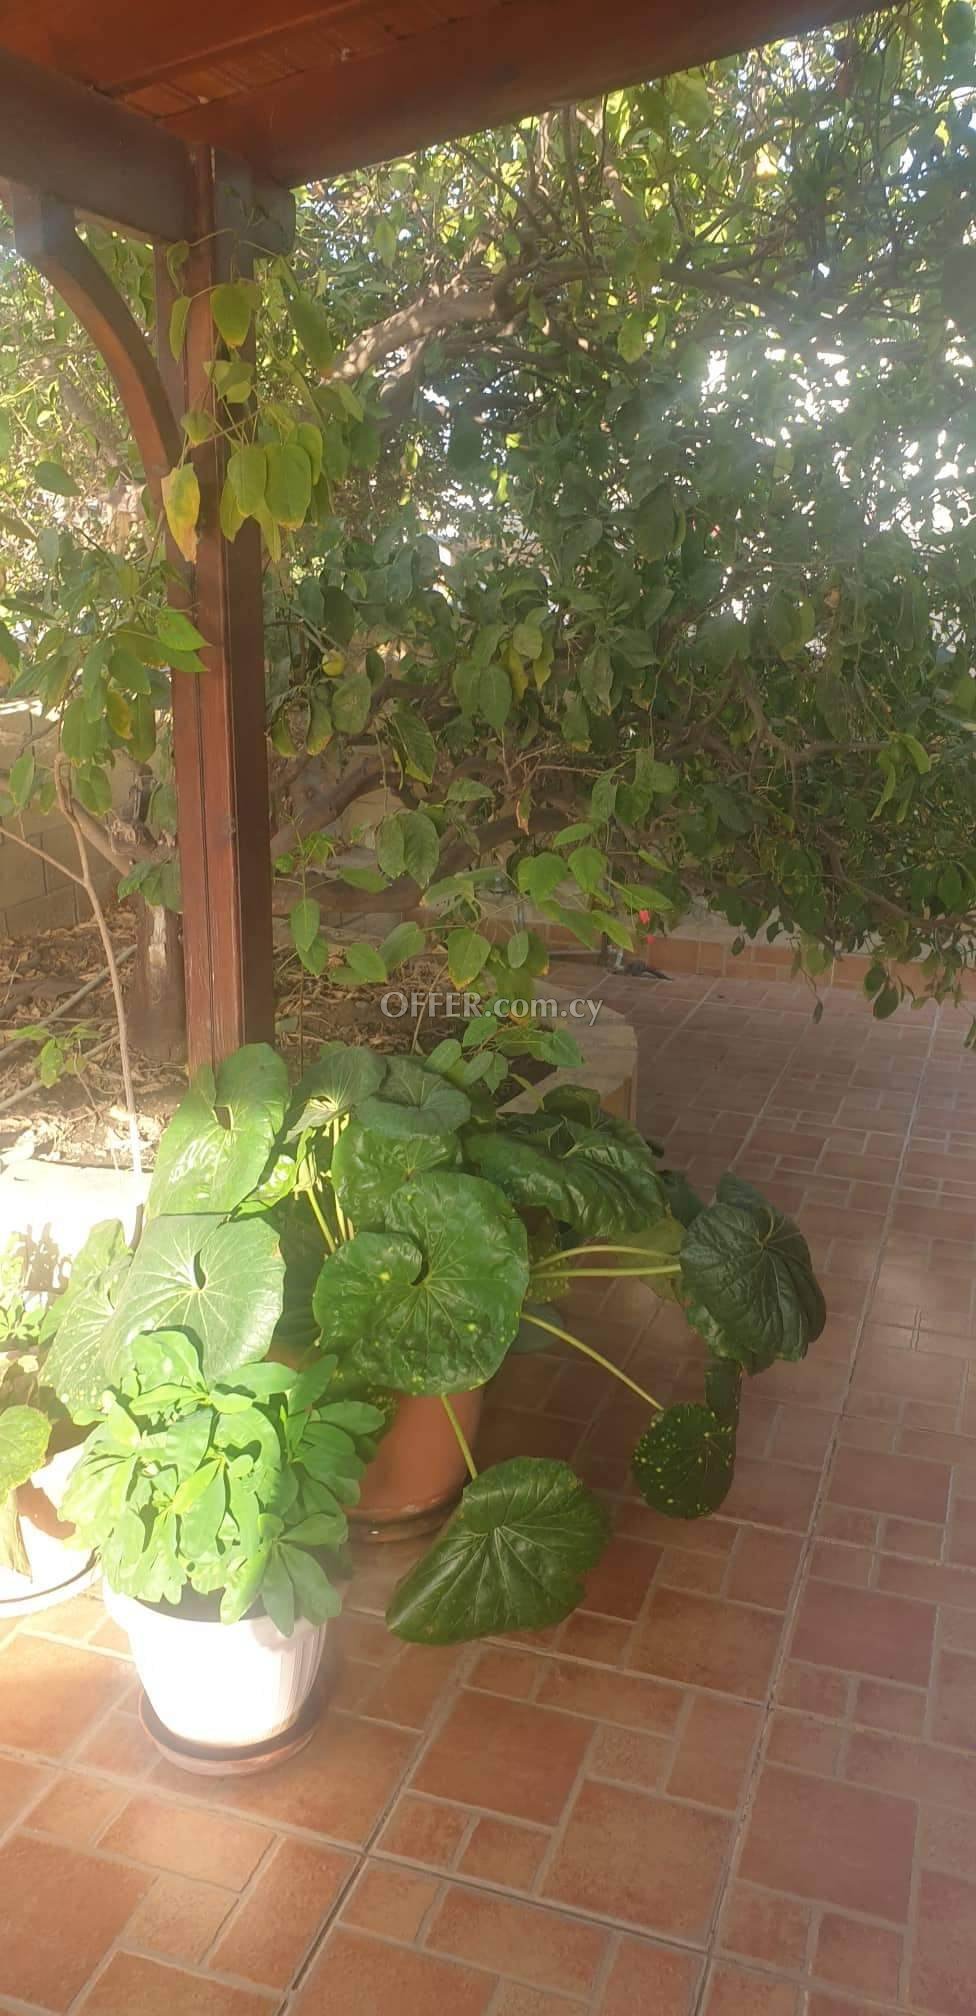 New For Sale €135,000 House (1 level bungalow) 2 bedrooms, Alethriko Larnaca - 7